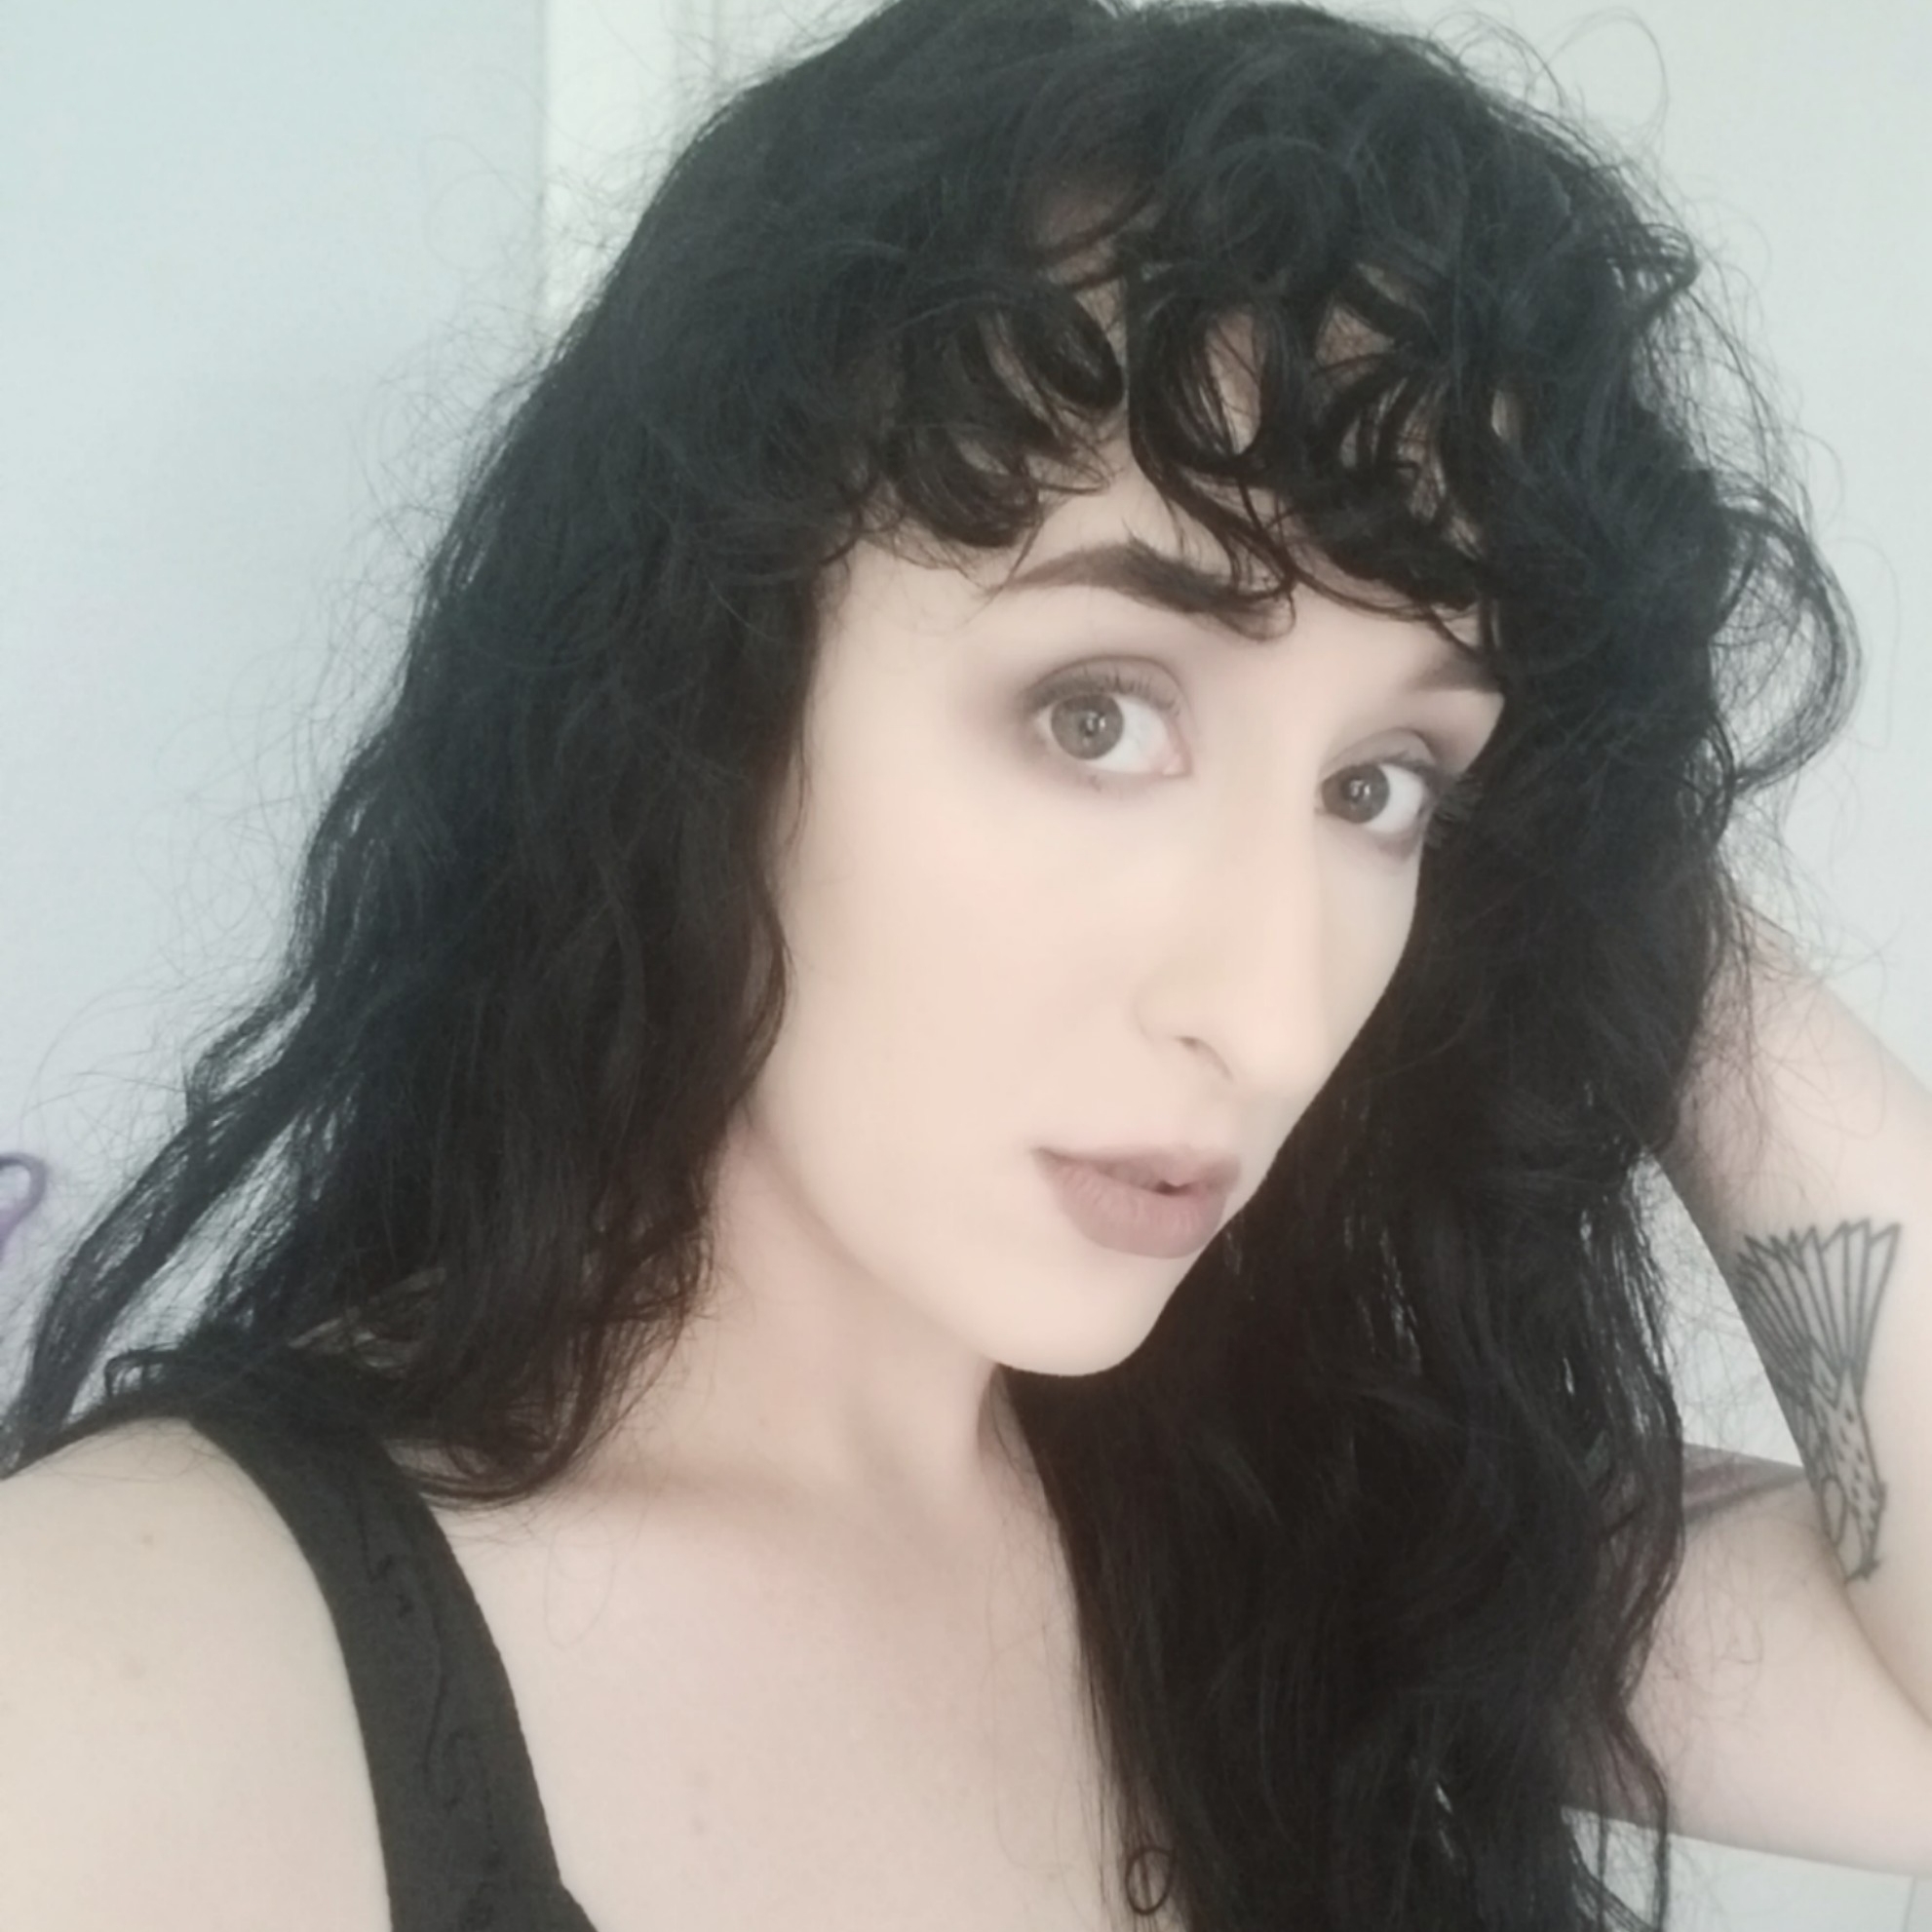 Image of Kathryne Grimm. A pale jewish person with long black curly hair. They're pretty.